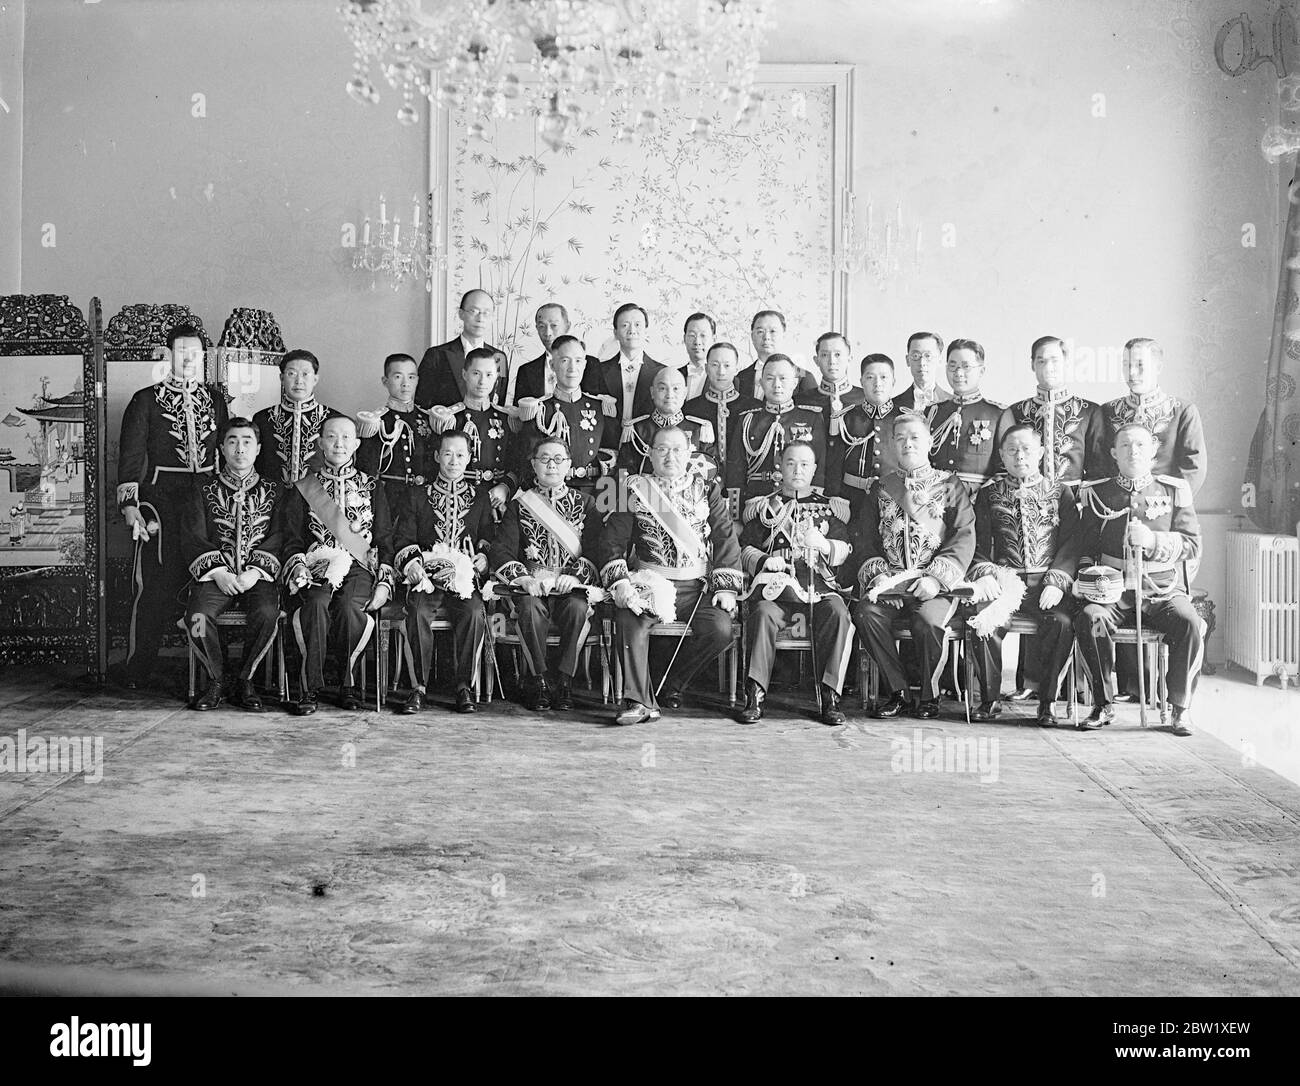 Republic of China's delegation to the Coronation (front row, 3rd from the left, left-to-right): [General Secretary of the Executive Yuan], Weng Wenhao [ Wong Wen-ho ]; Quo Tai-chi [ Guo Taiqi / Kuo T’ai-ch’i ] Chinese Ambassador to London; [ Finance Minister ] Dr H. H. Kung [ Kung Hsiang-hsi ]; Fleet Admiral Chen Shaokuan [ Chen Kuan / Chen Shao-kwan ]; T. K. Tseng [?]; Kuo Ping-Wen [Ping-Wen Kuo / Guo Bingwen] 25 May 1937 [?] [The Chinese mission, which is led by Dr H. H. Kung and Admiral Chen Kuan, consists of Messrs, Yung Wen Ching (chief secretary of the mission), Cheng Yung Pu, Chu Chiang Stock Photo